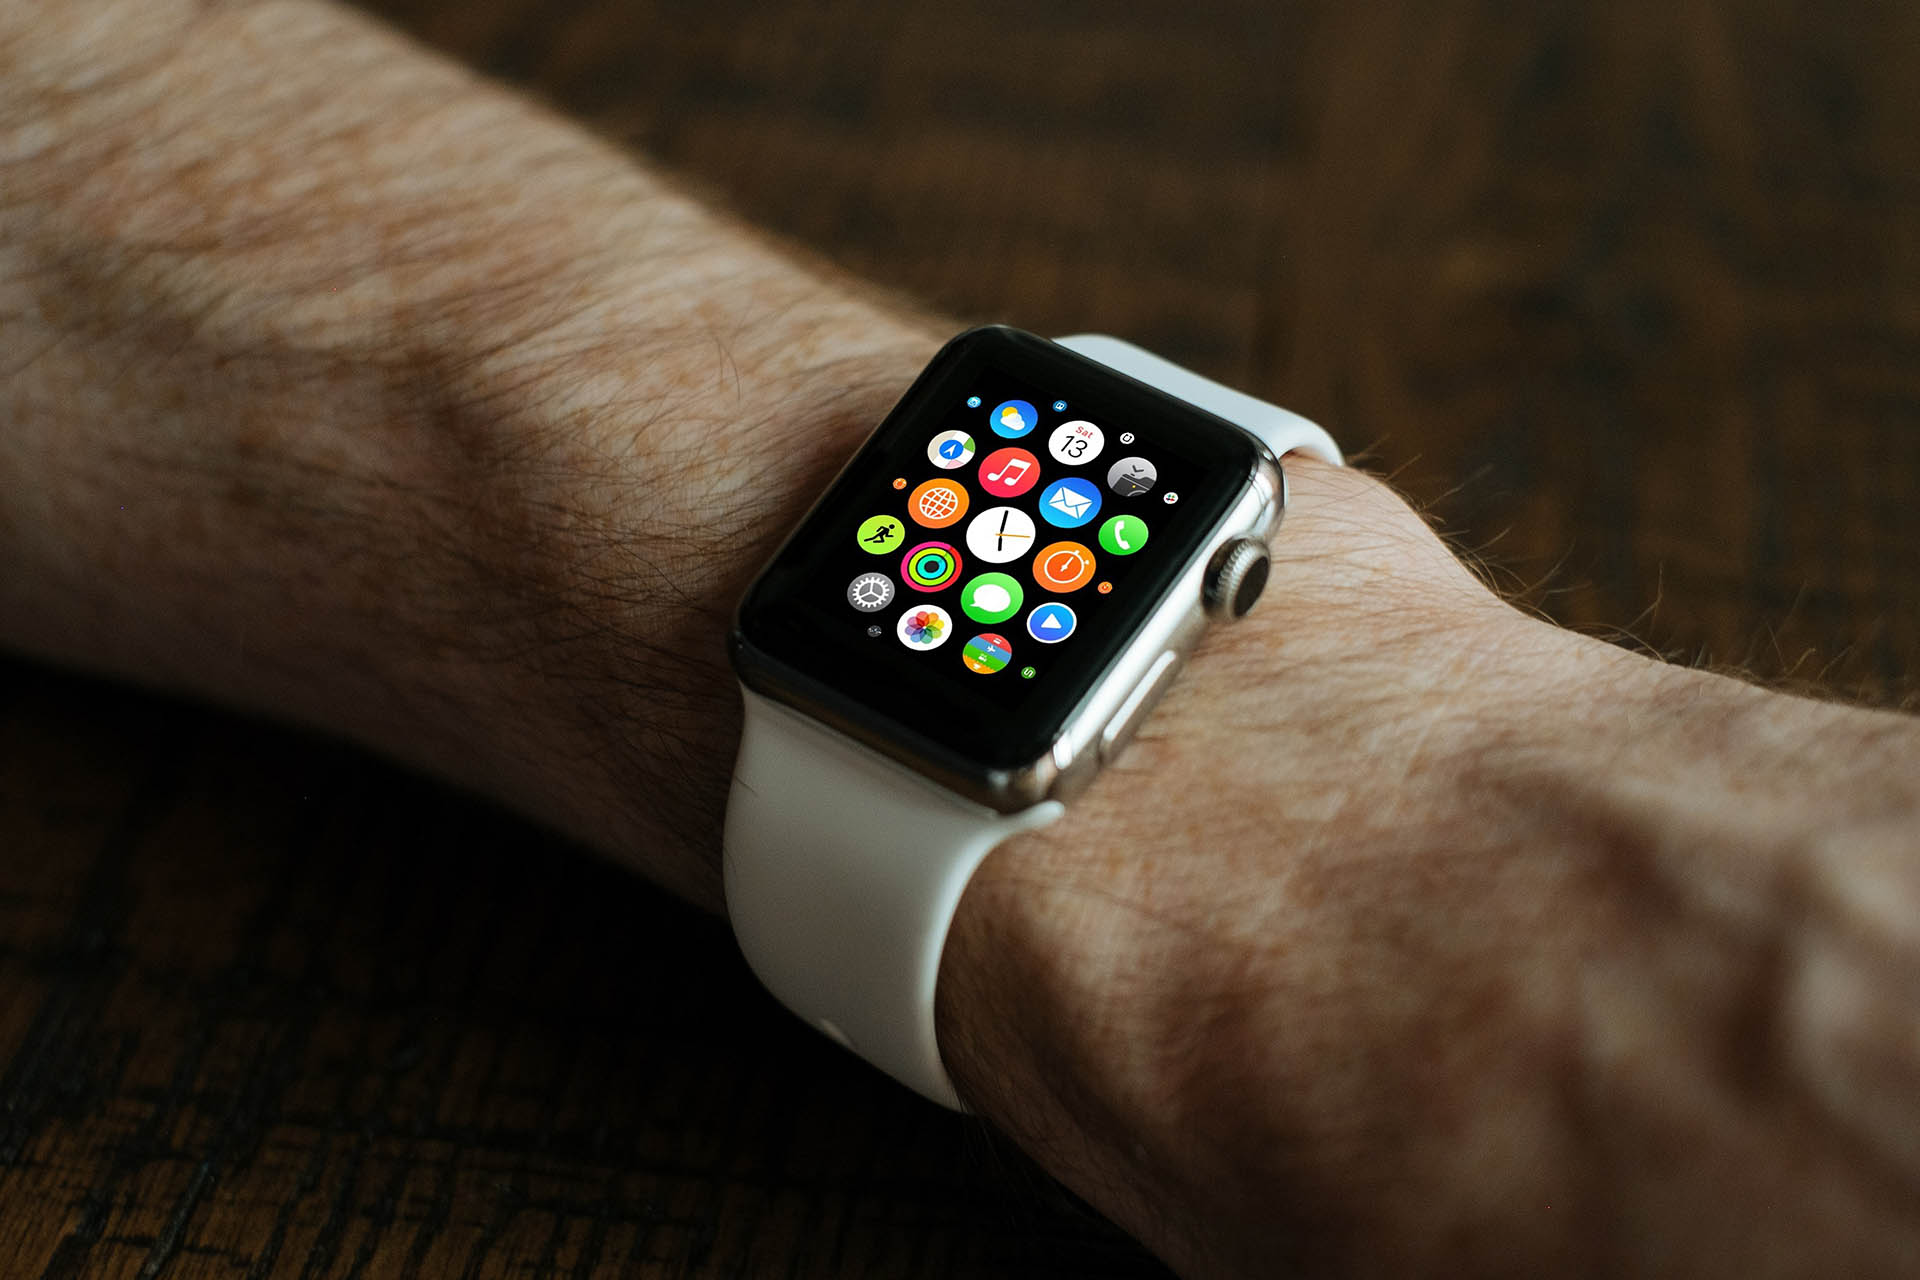 Silver Apple Watch with white Sport Band and honeycomb menuon arm